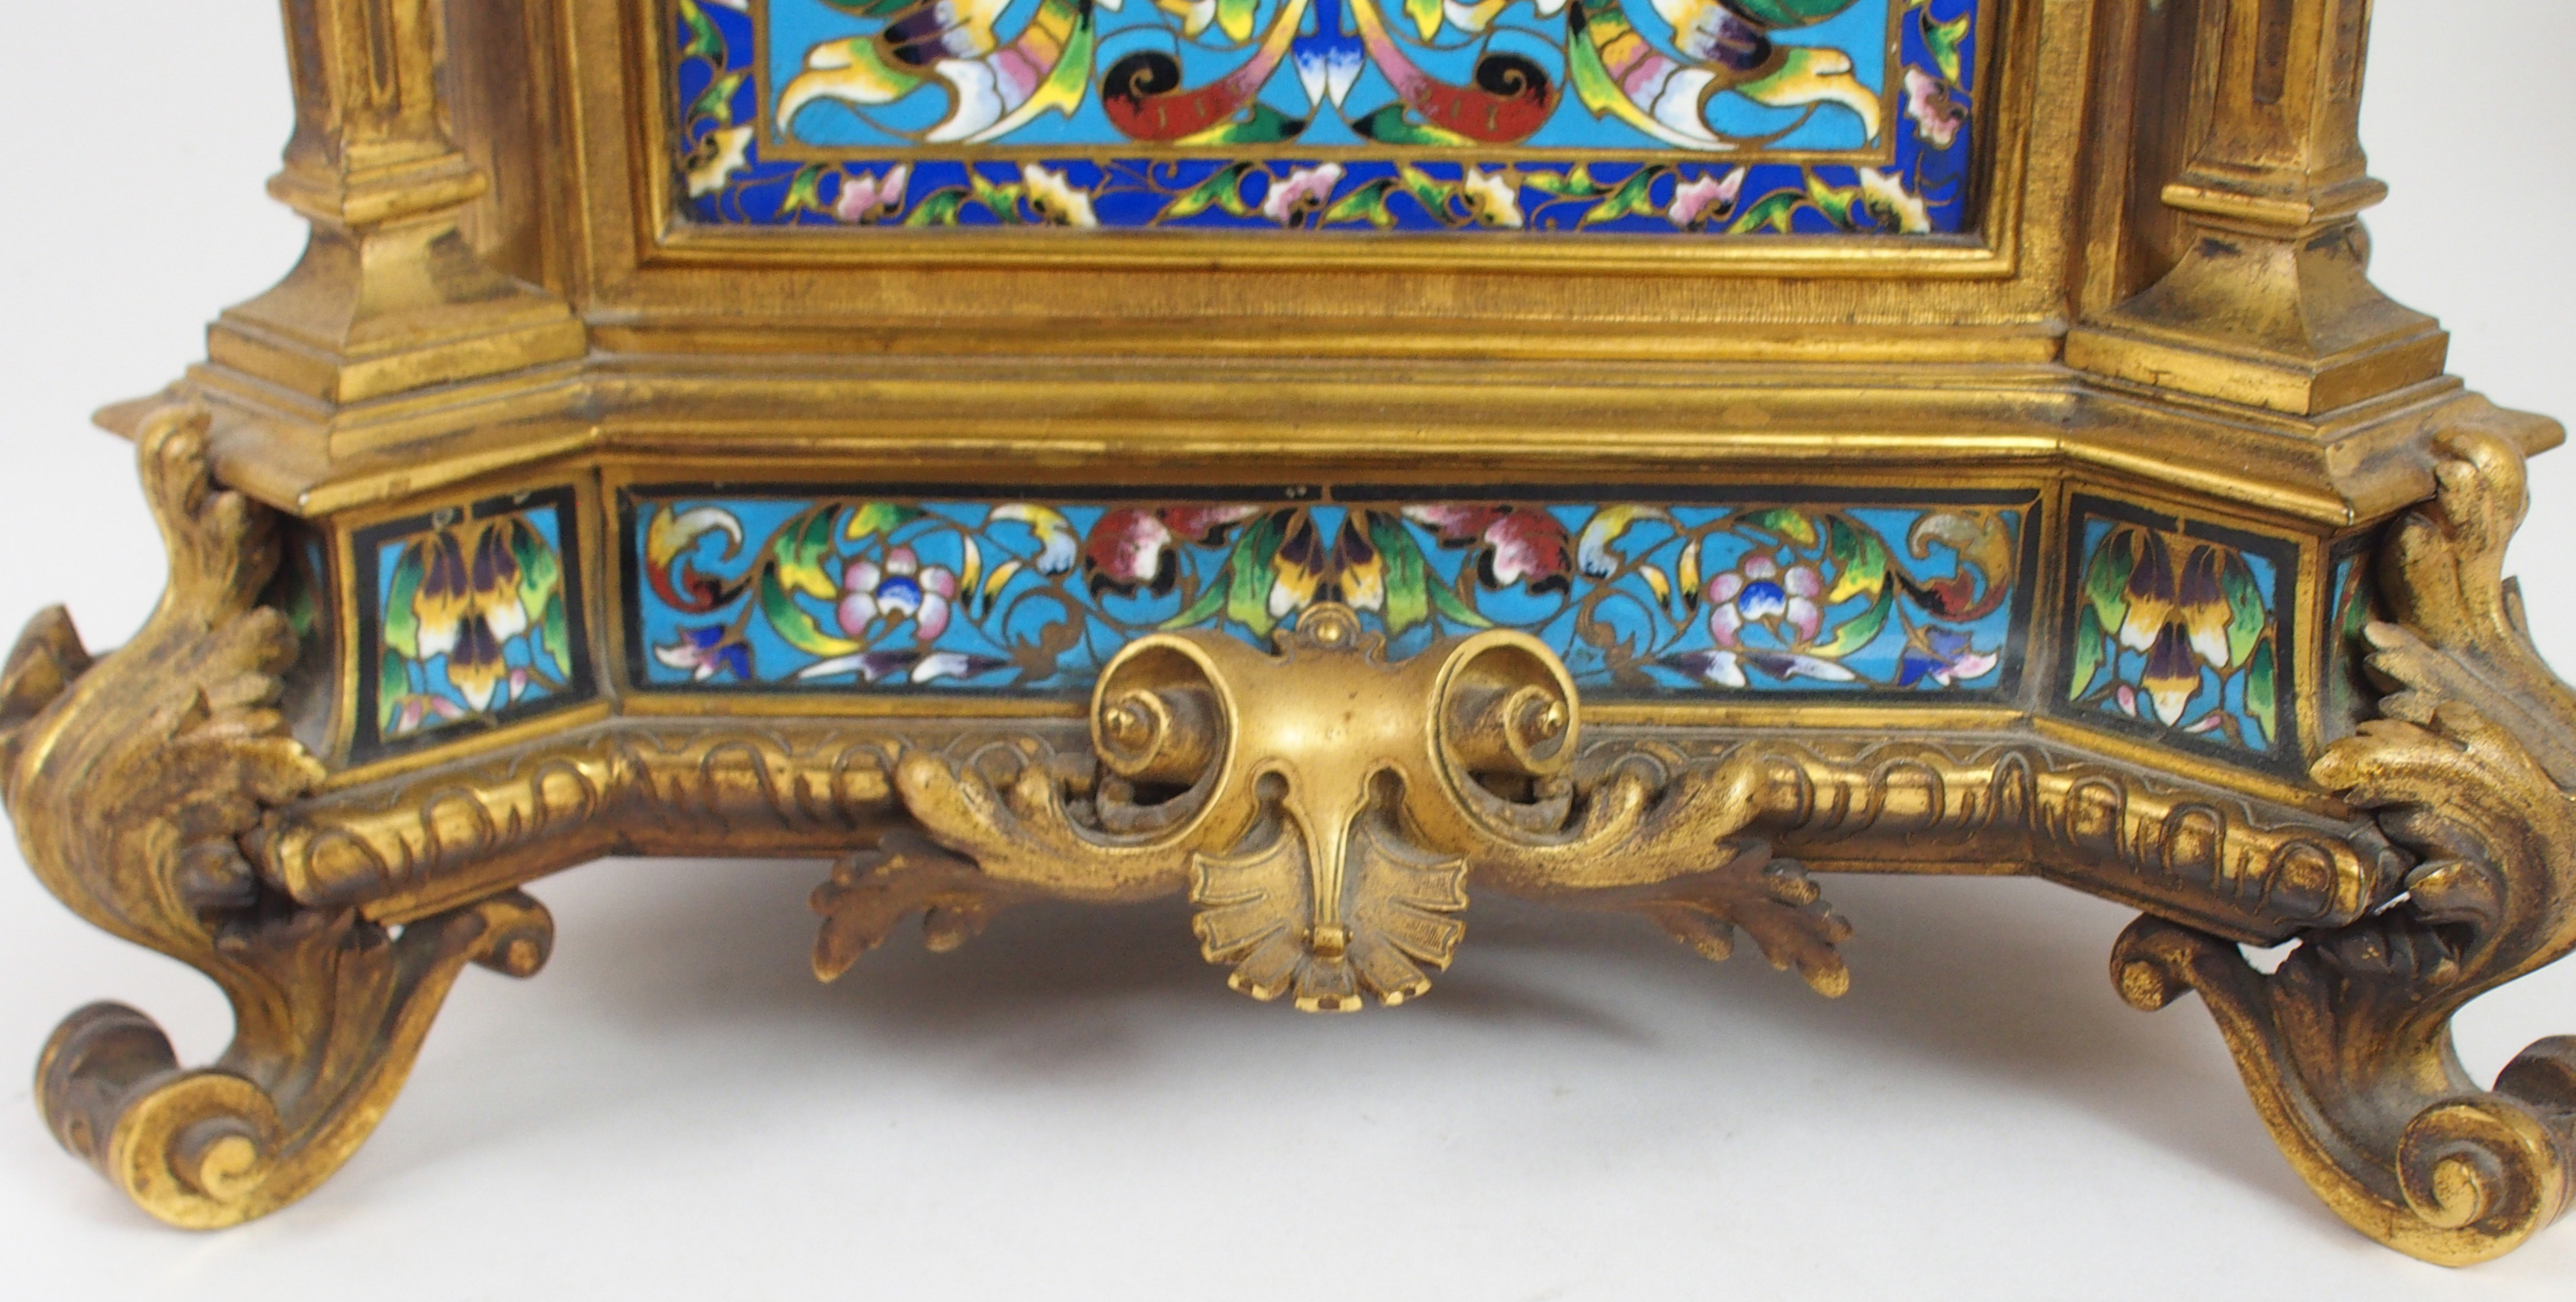 AN IMPRESSIVE 19TH CENTURY FRENCH CHAMPLEVE ENAMEL MANTLE CLOCK the urn mounted top with griffin han - Image 5 of 15